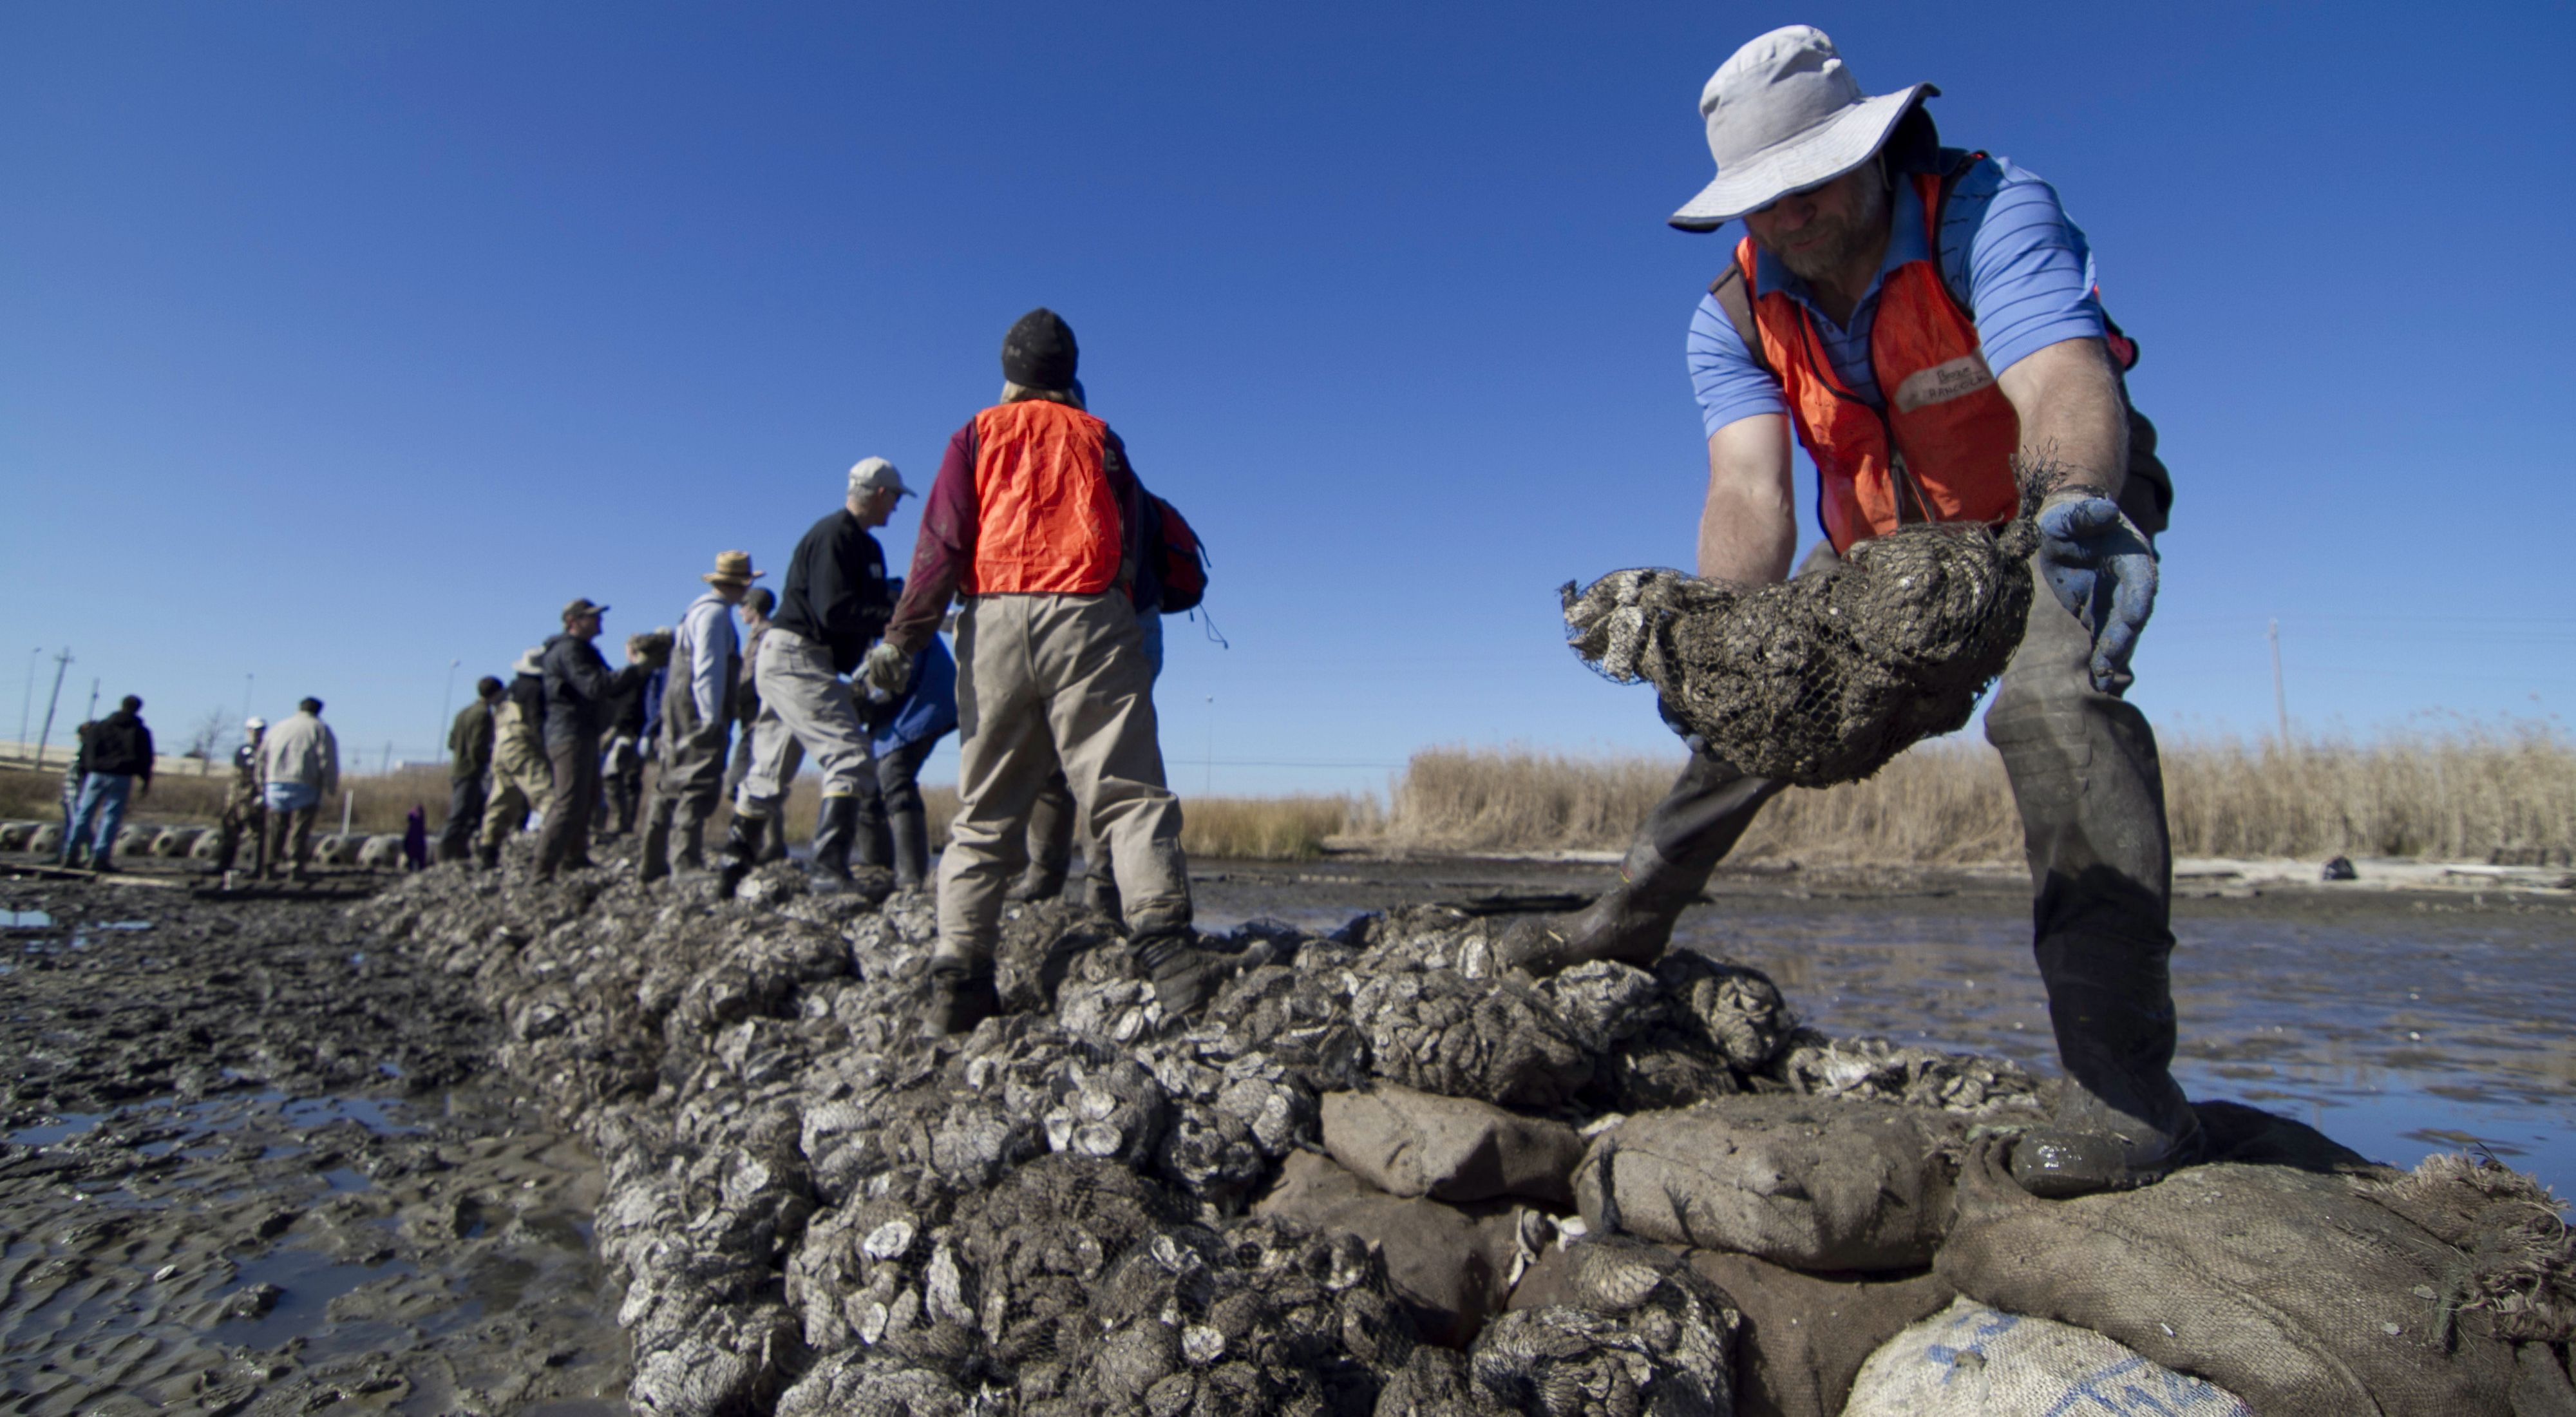 Volunteers build an oyster reef in Alabama's Mobile Bay to help restore the Gulf of Mexico.